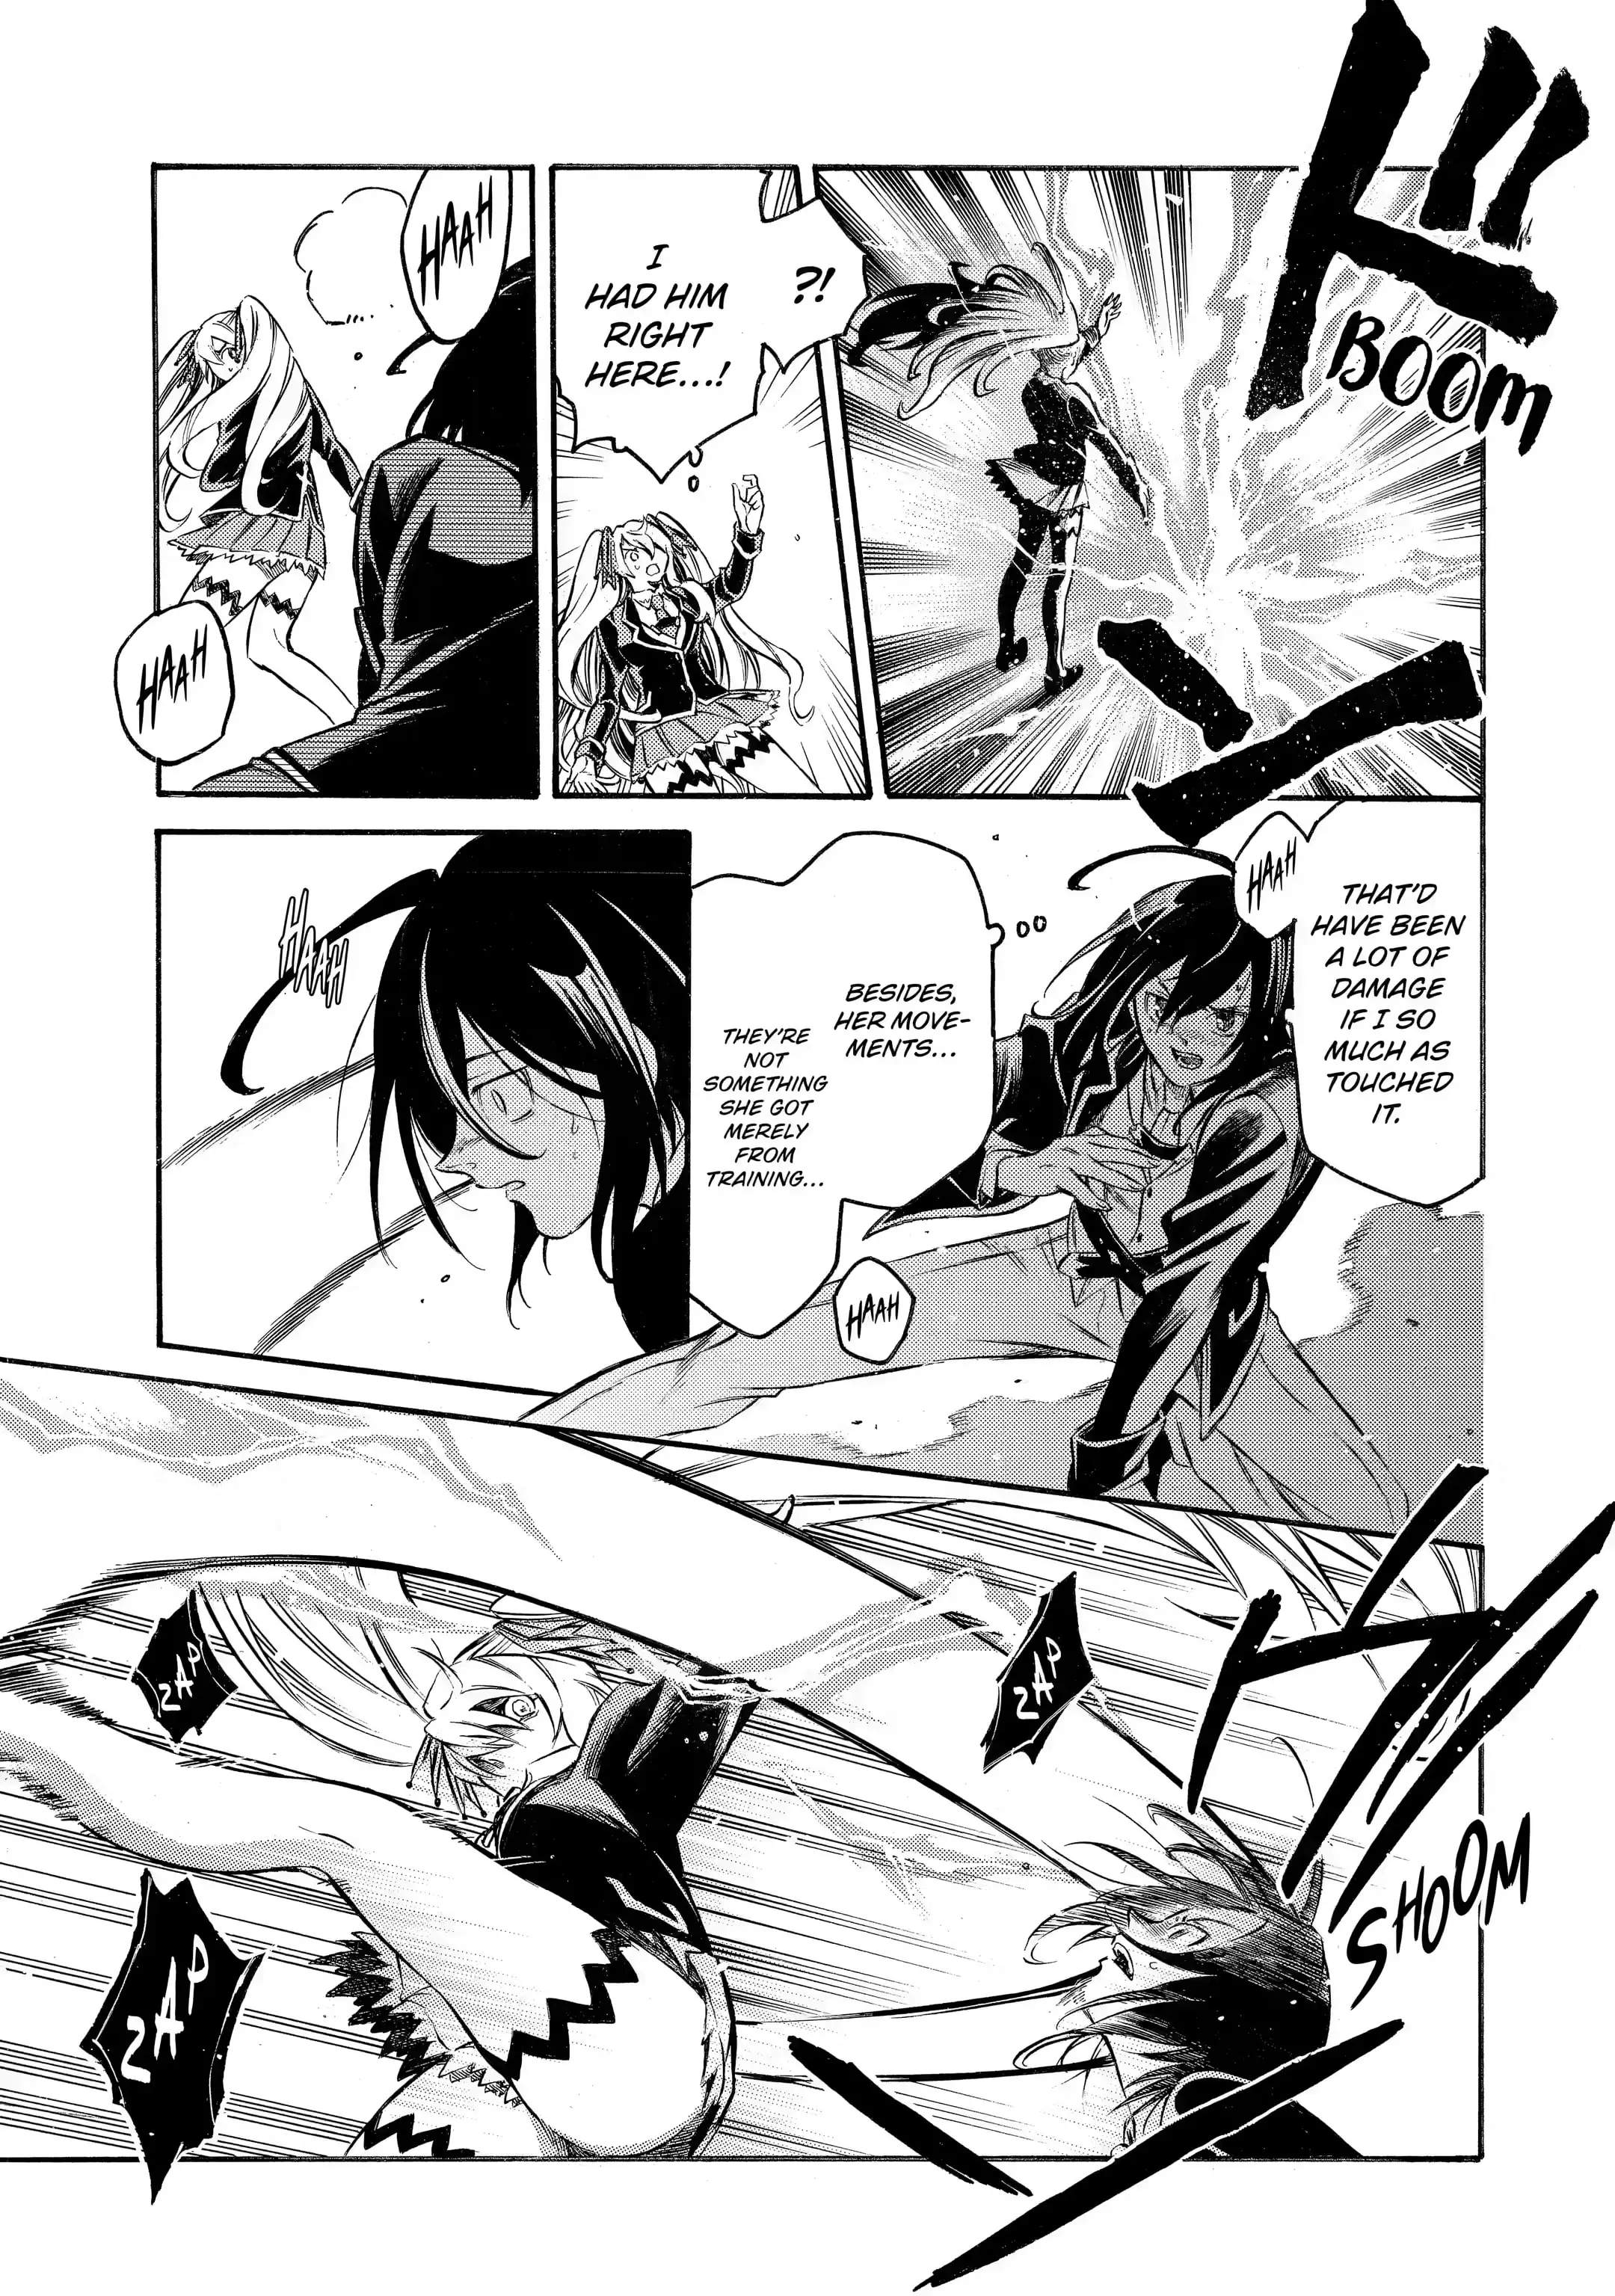 Reincarnation of the Unrivalled Time Mage: The Underachiever at the Magic Academy Turns Out to Be the Strongest Mage Who Controls Time! Chapter 2.3-eng-li - Page 4